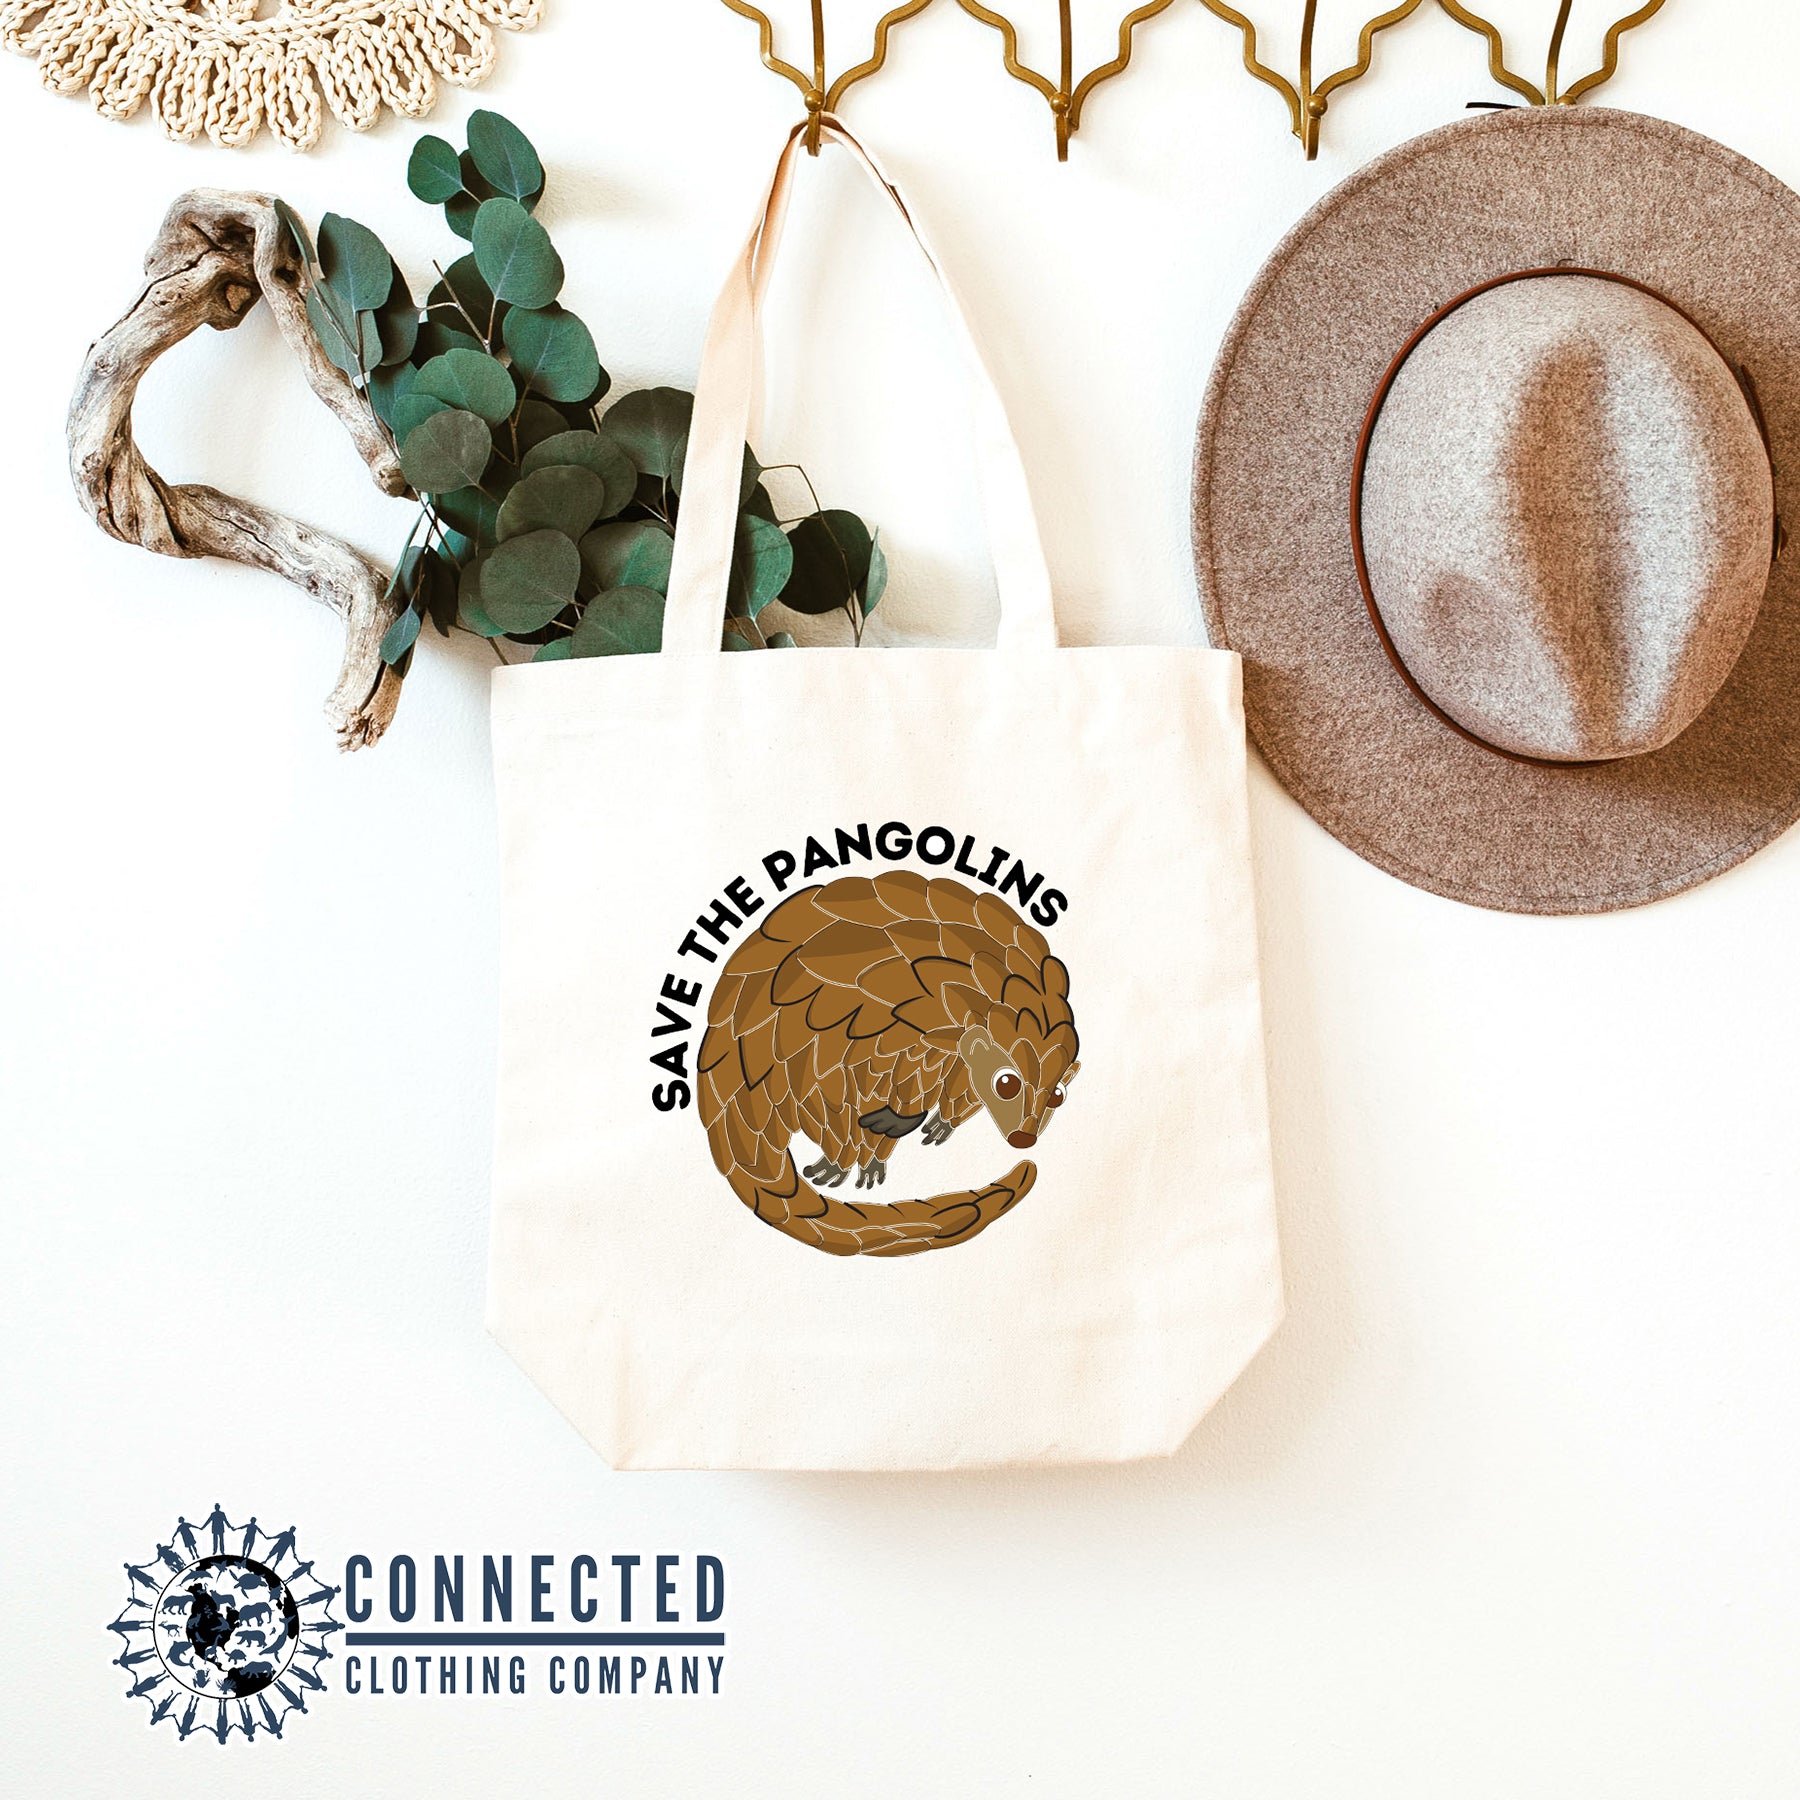 Save The Pangolins Tote Bag - Connected Clothing Company- 10% of proceeds donated to wildlife conservation